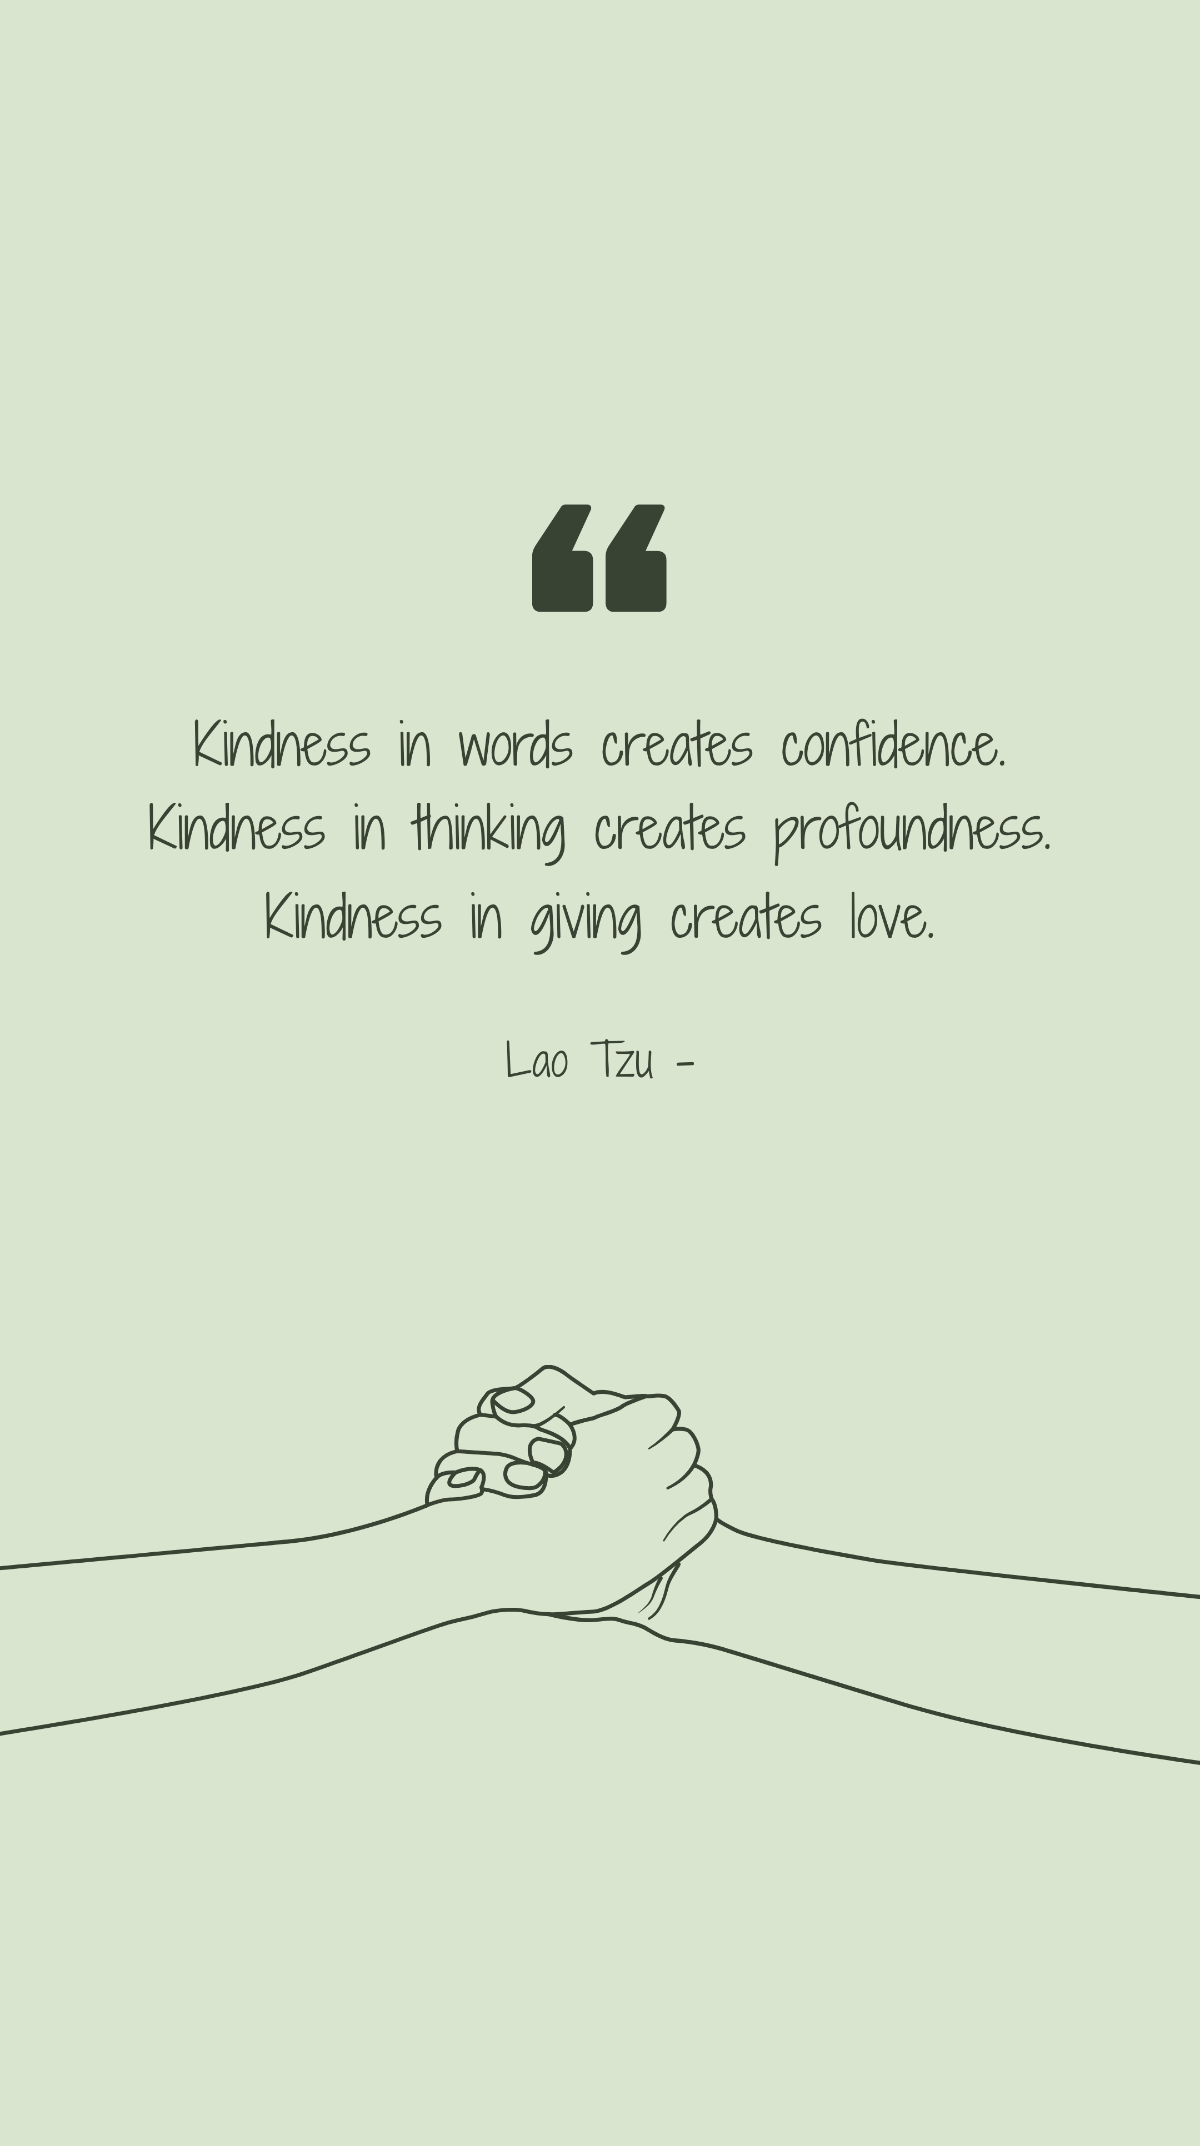 Free Lao Tzu - Kindness in words creates confidence. Kindness in thinking creates profoundness. Kindness in giving creates love. Template